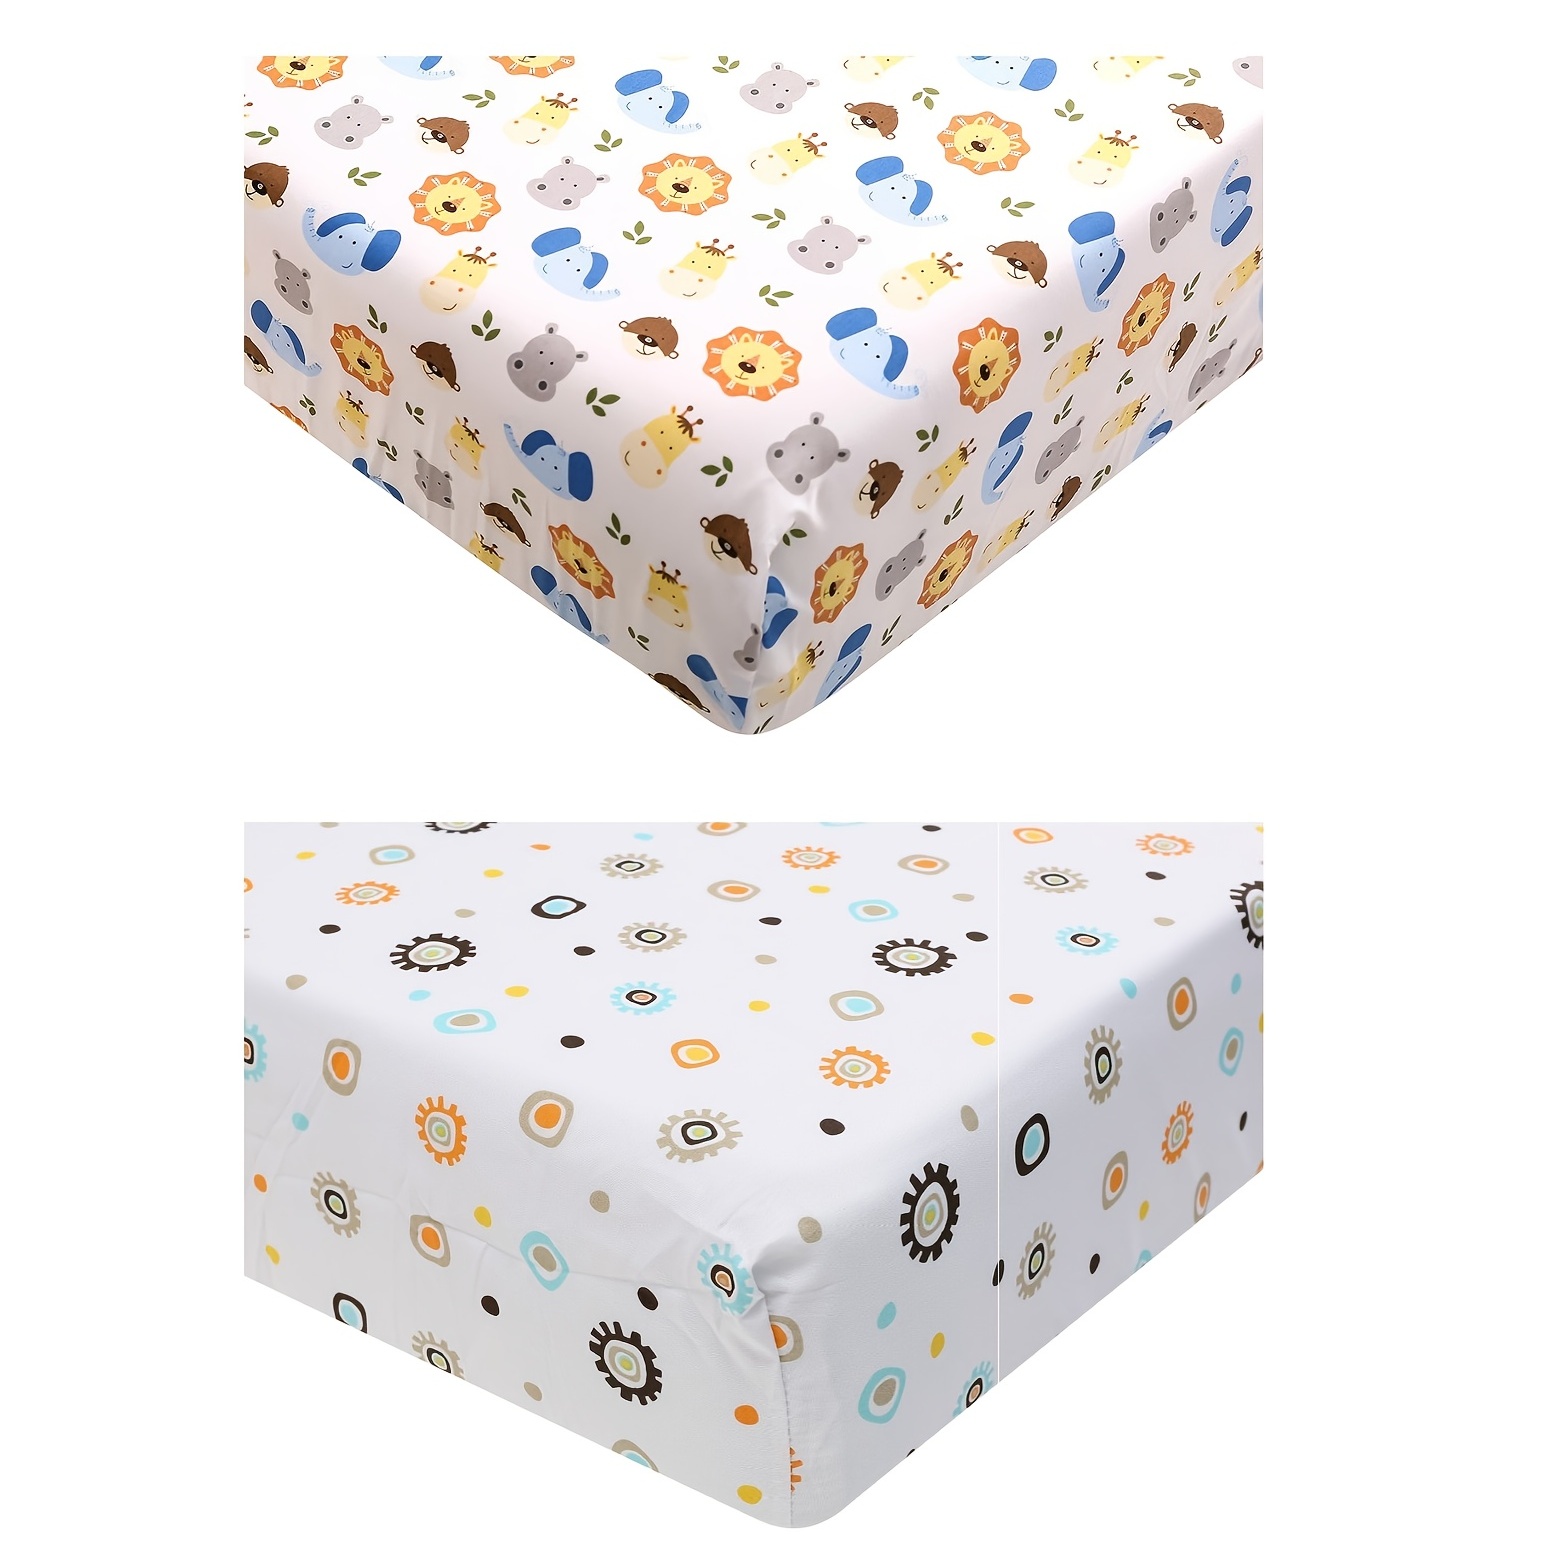 2pcs 100% Cotton Crib Sheets For Boys Girls - Unisex Fitted Sheet on Sale